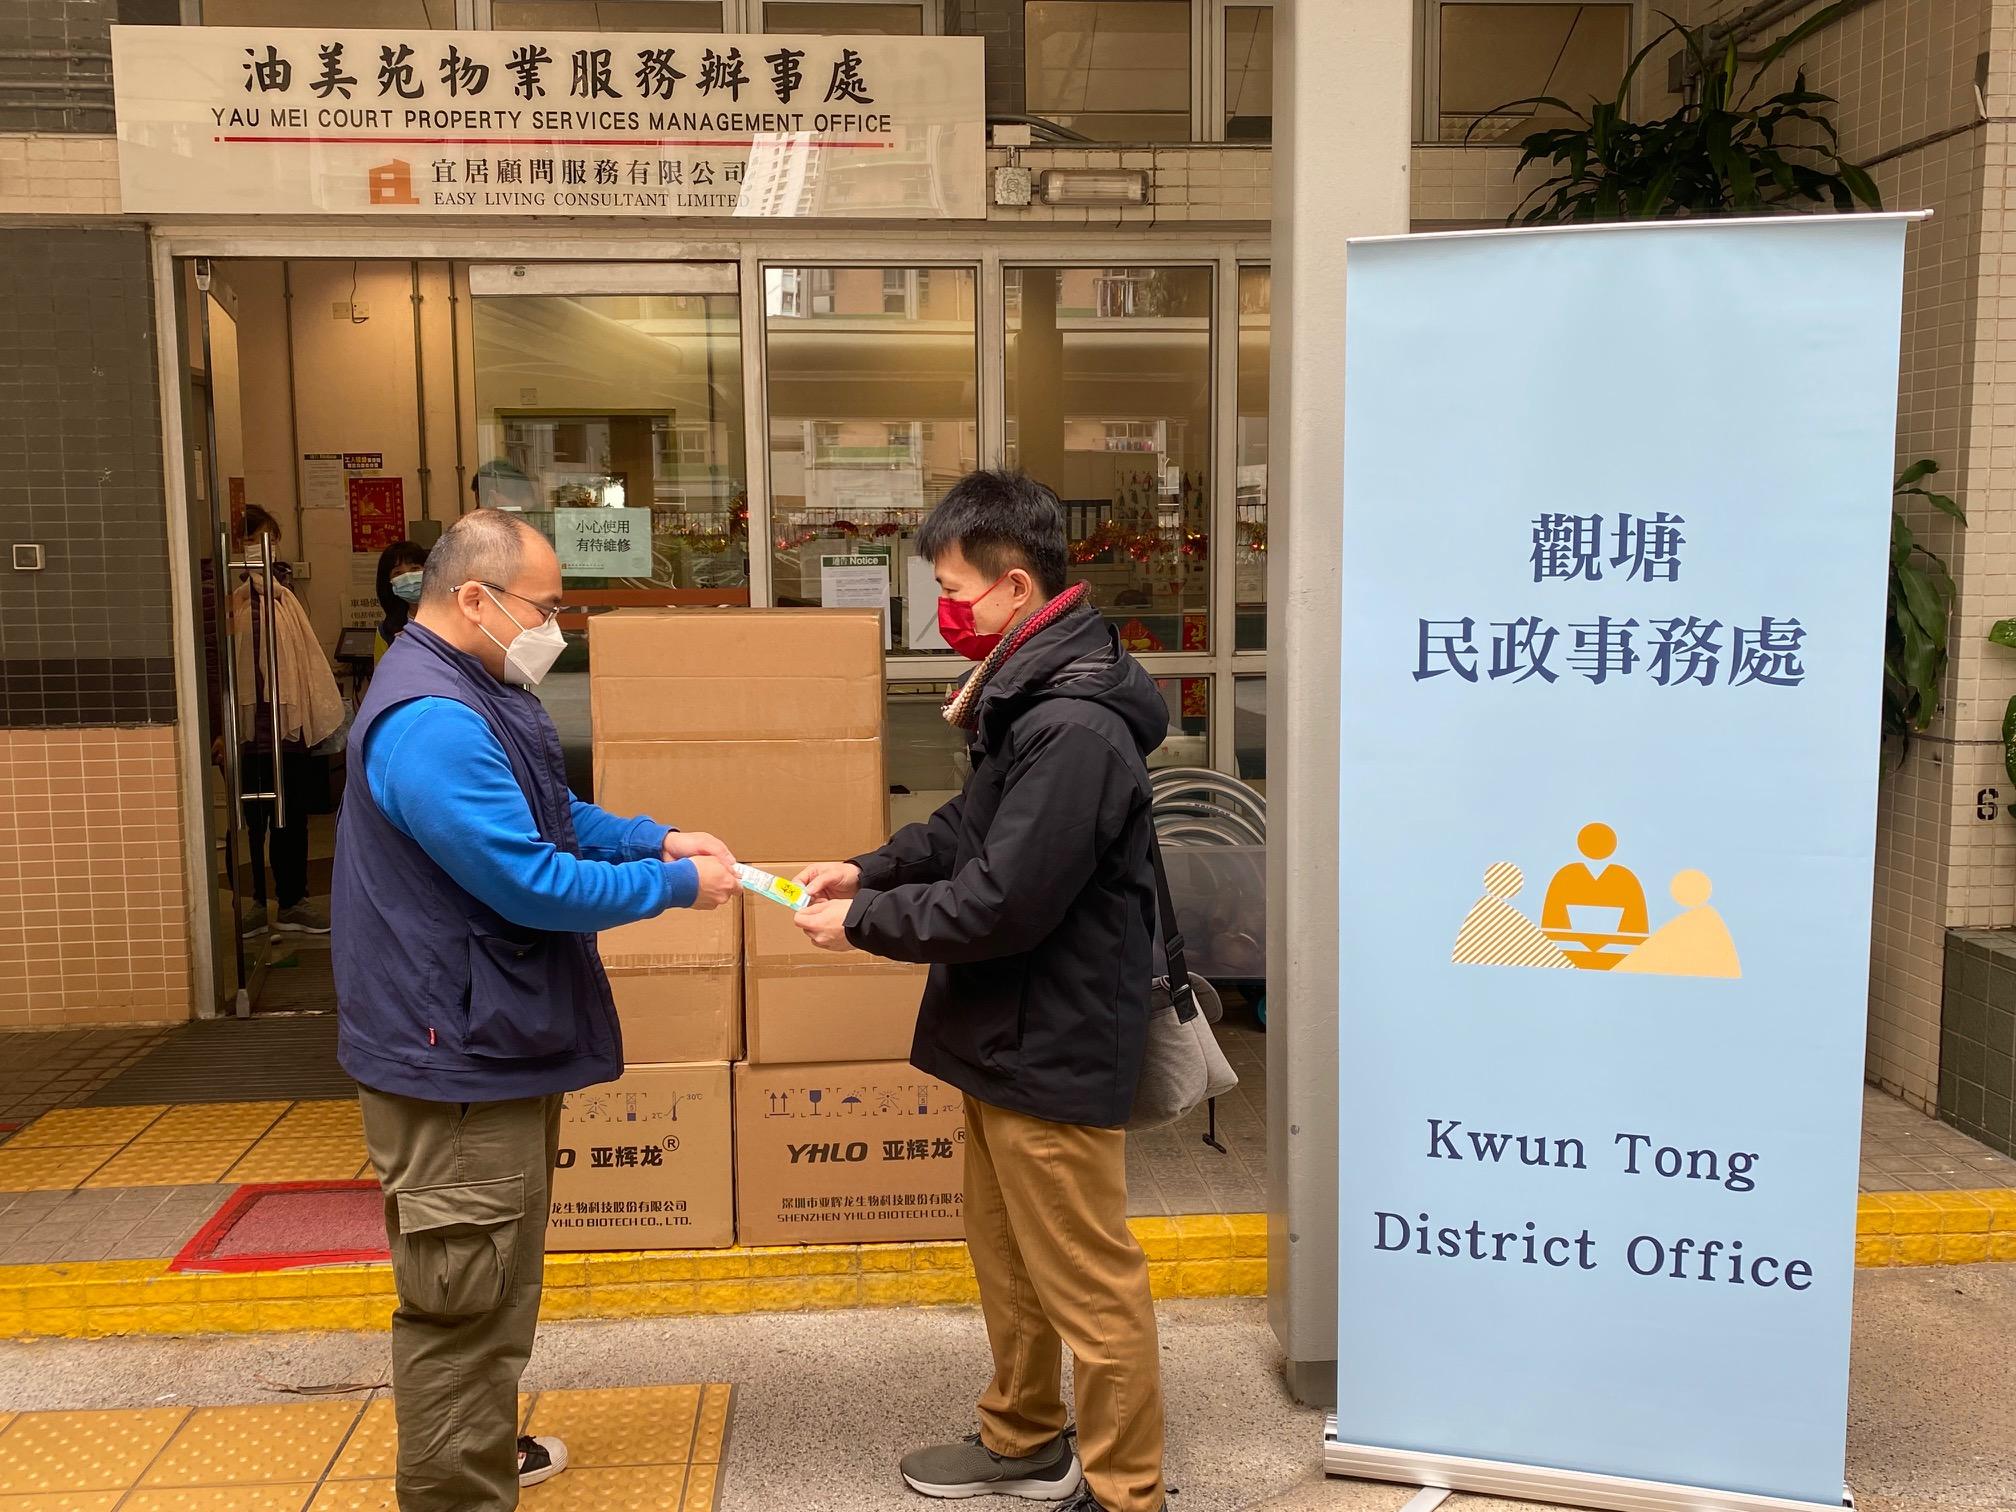 The Kwun Tong District Office today (February 5) distributed COVID-19 rapid test kits to households, cleansing workers and property management staff for voluntary testing through property management companies of the housing estates in the district.